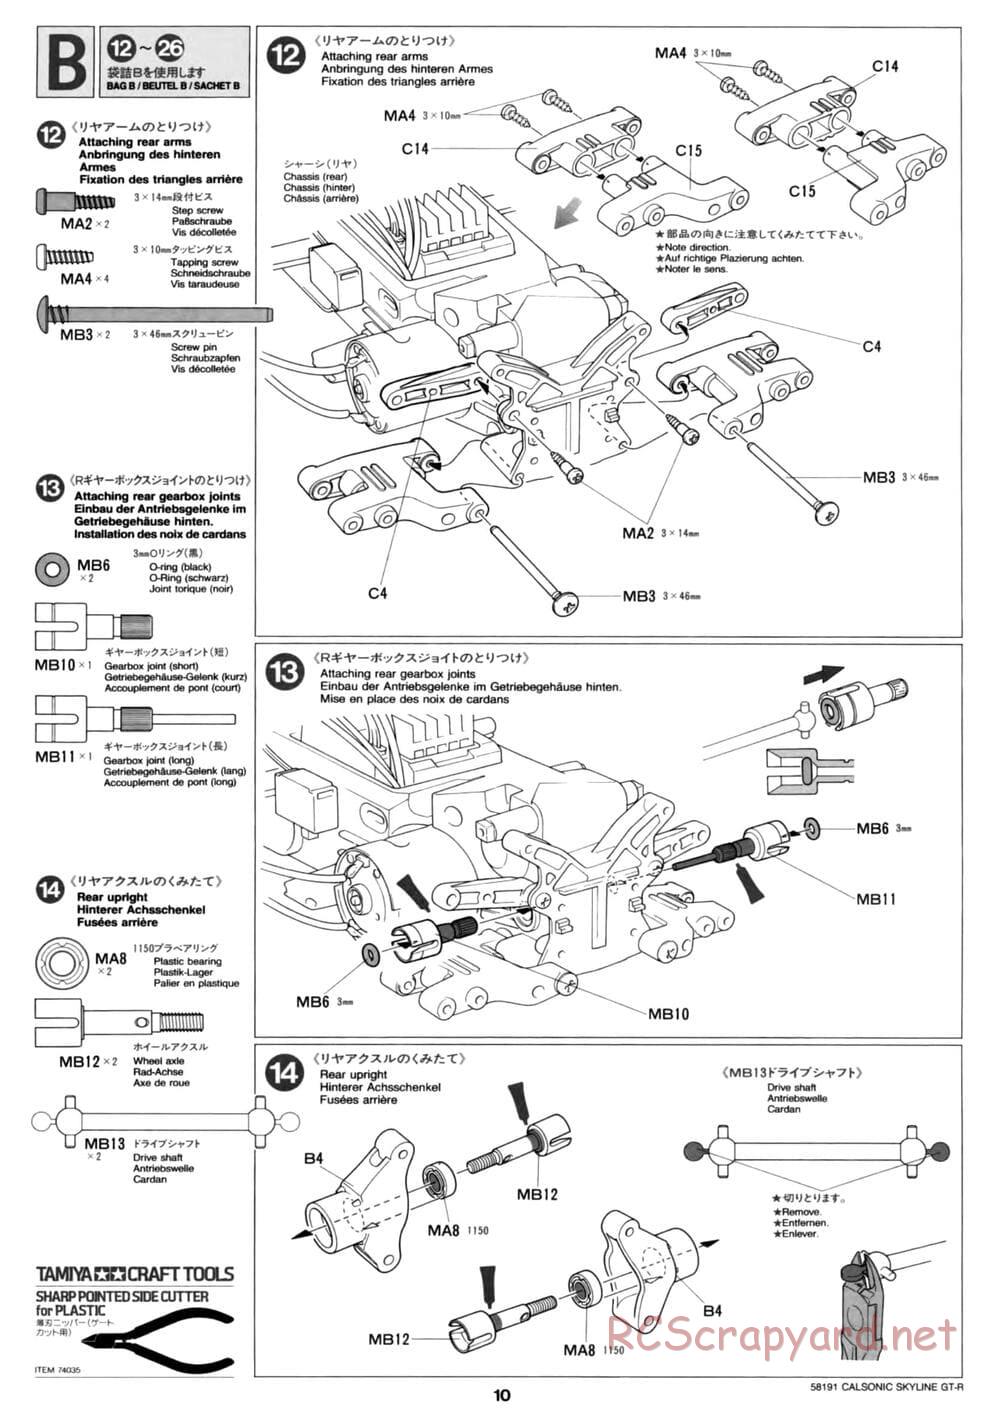 Tamiya - Calsonic Skyline GT-R - TL-01 Chassis - Manual - Page 10